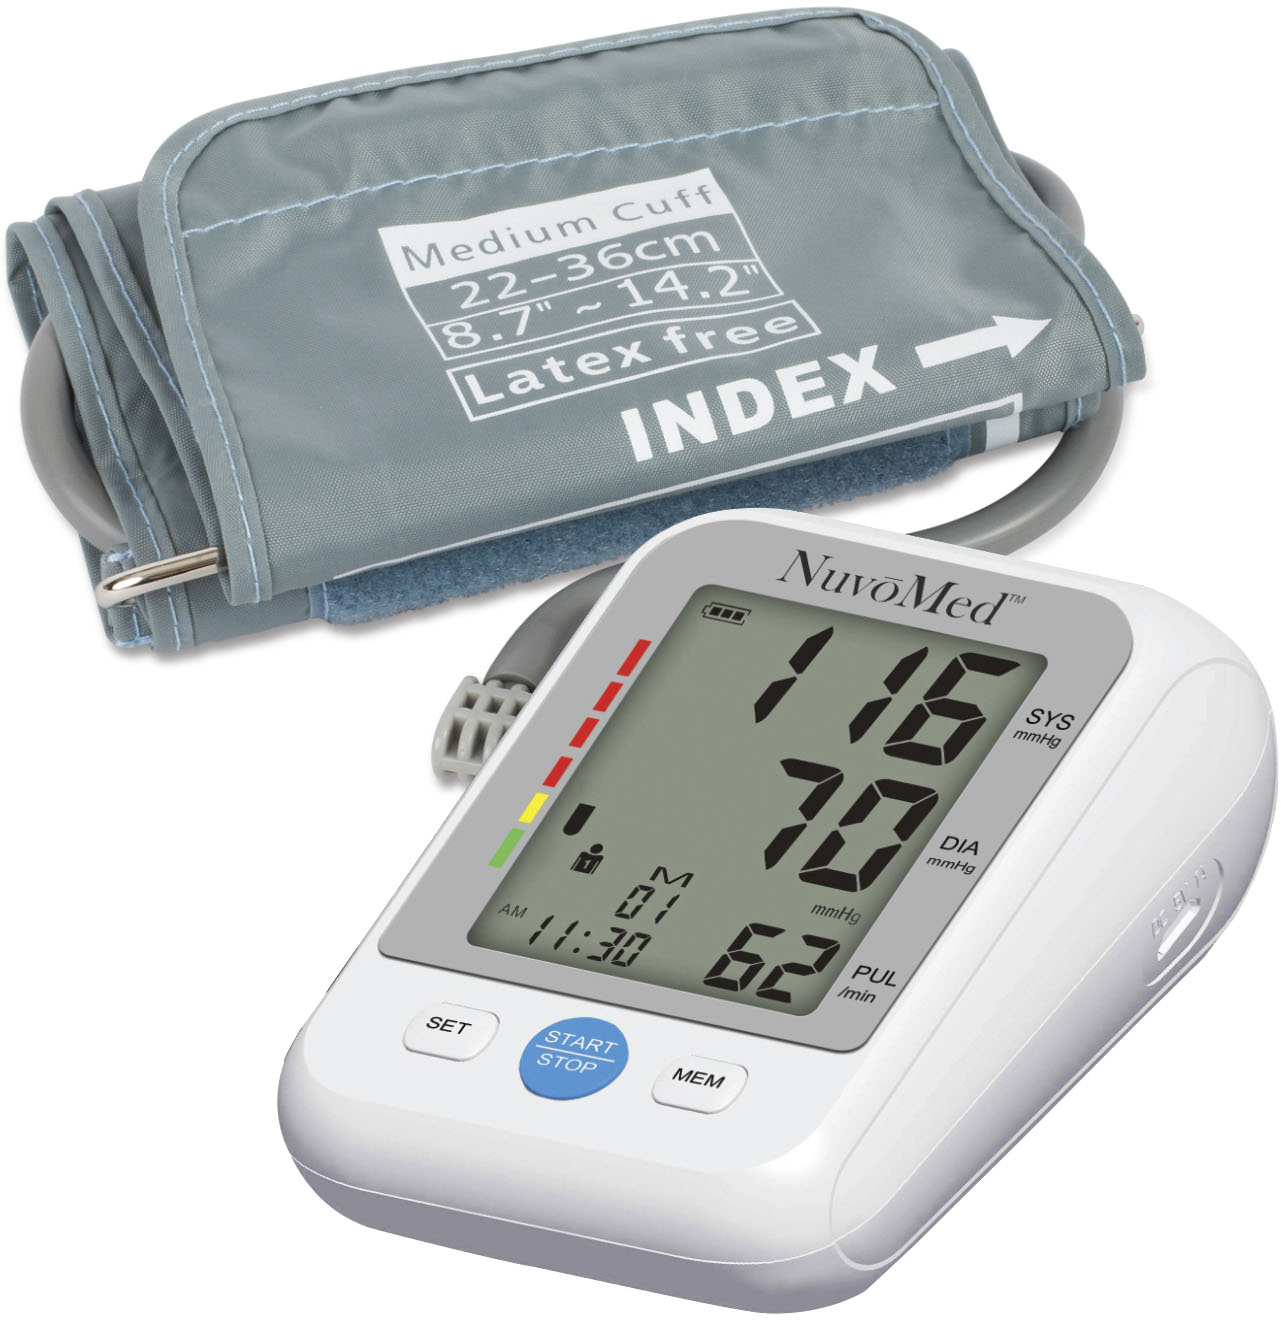 The Best Blood Pressure Monitors with AFib Detection